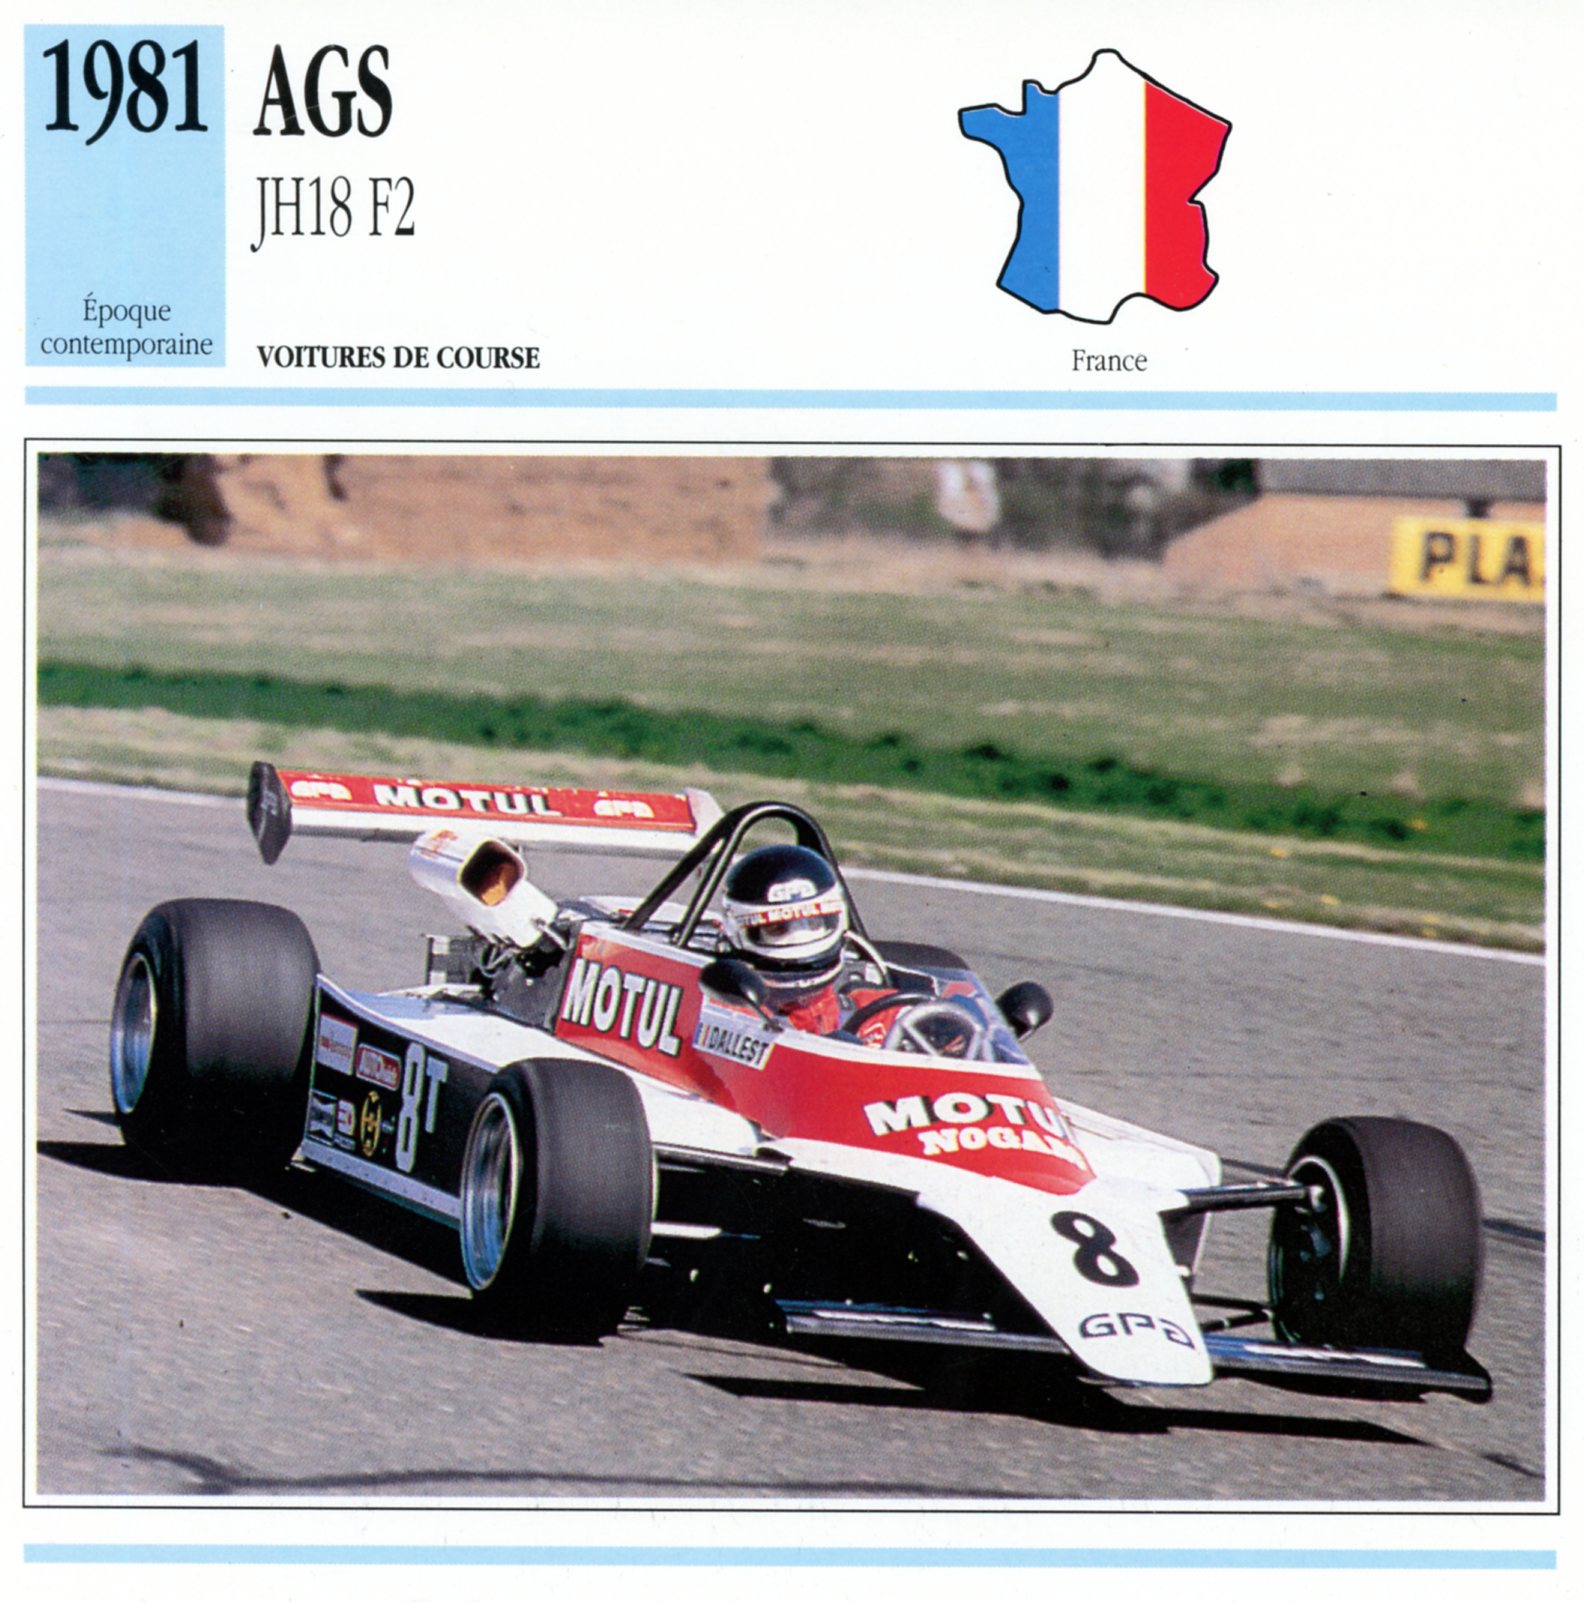 FICHE-AUTO-AGS-JH18-F2-1981-LEMASTERBROCKERS-CARS-CARD